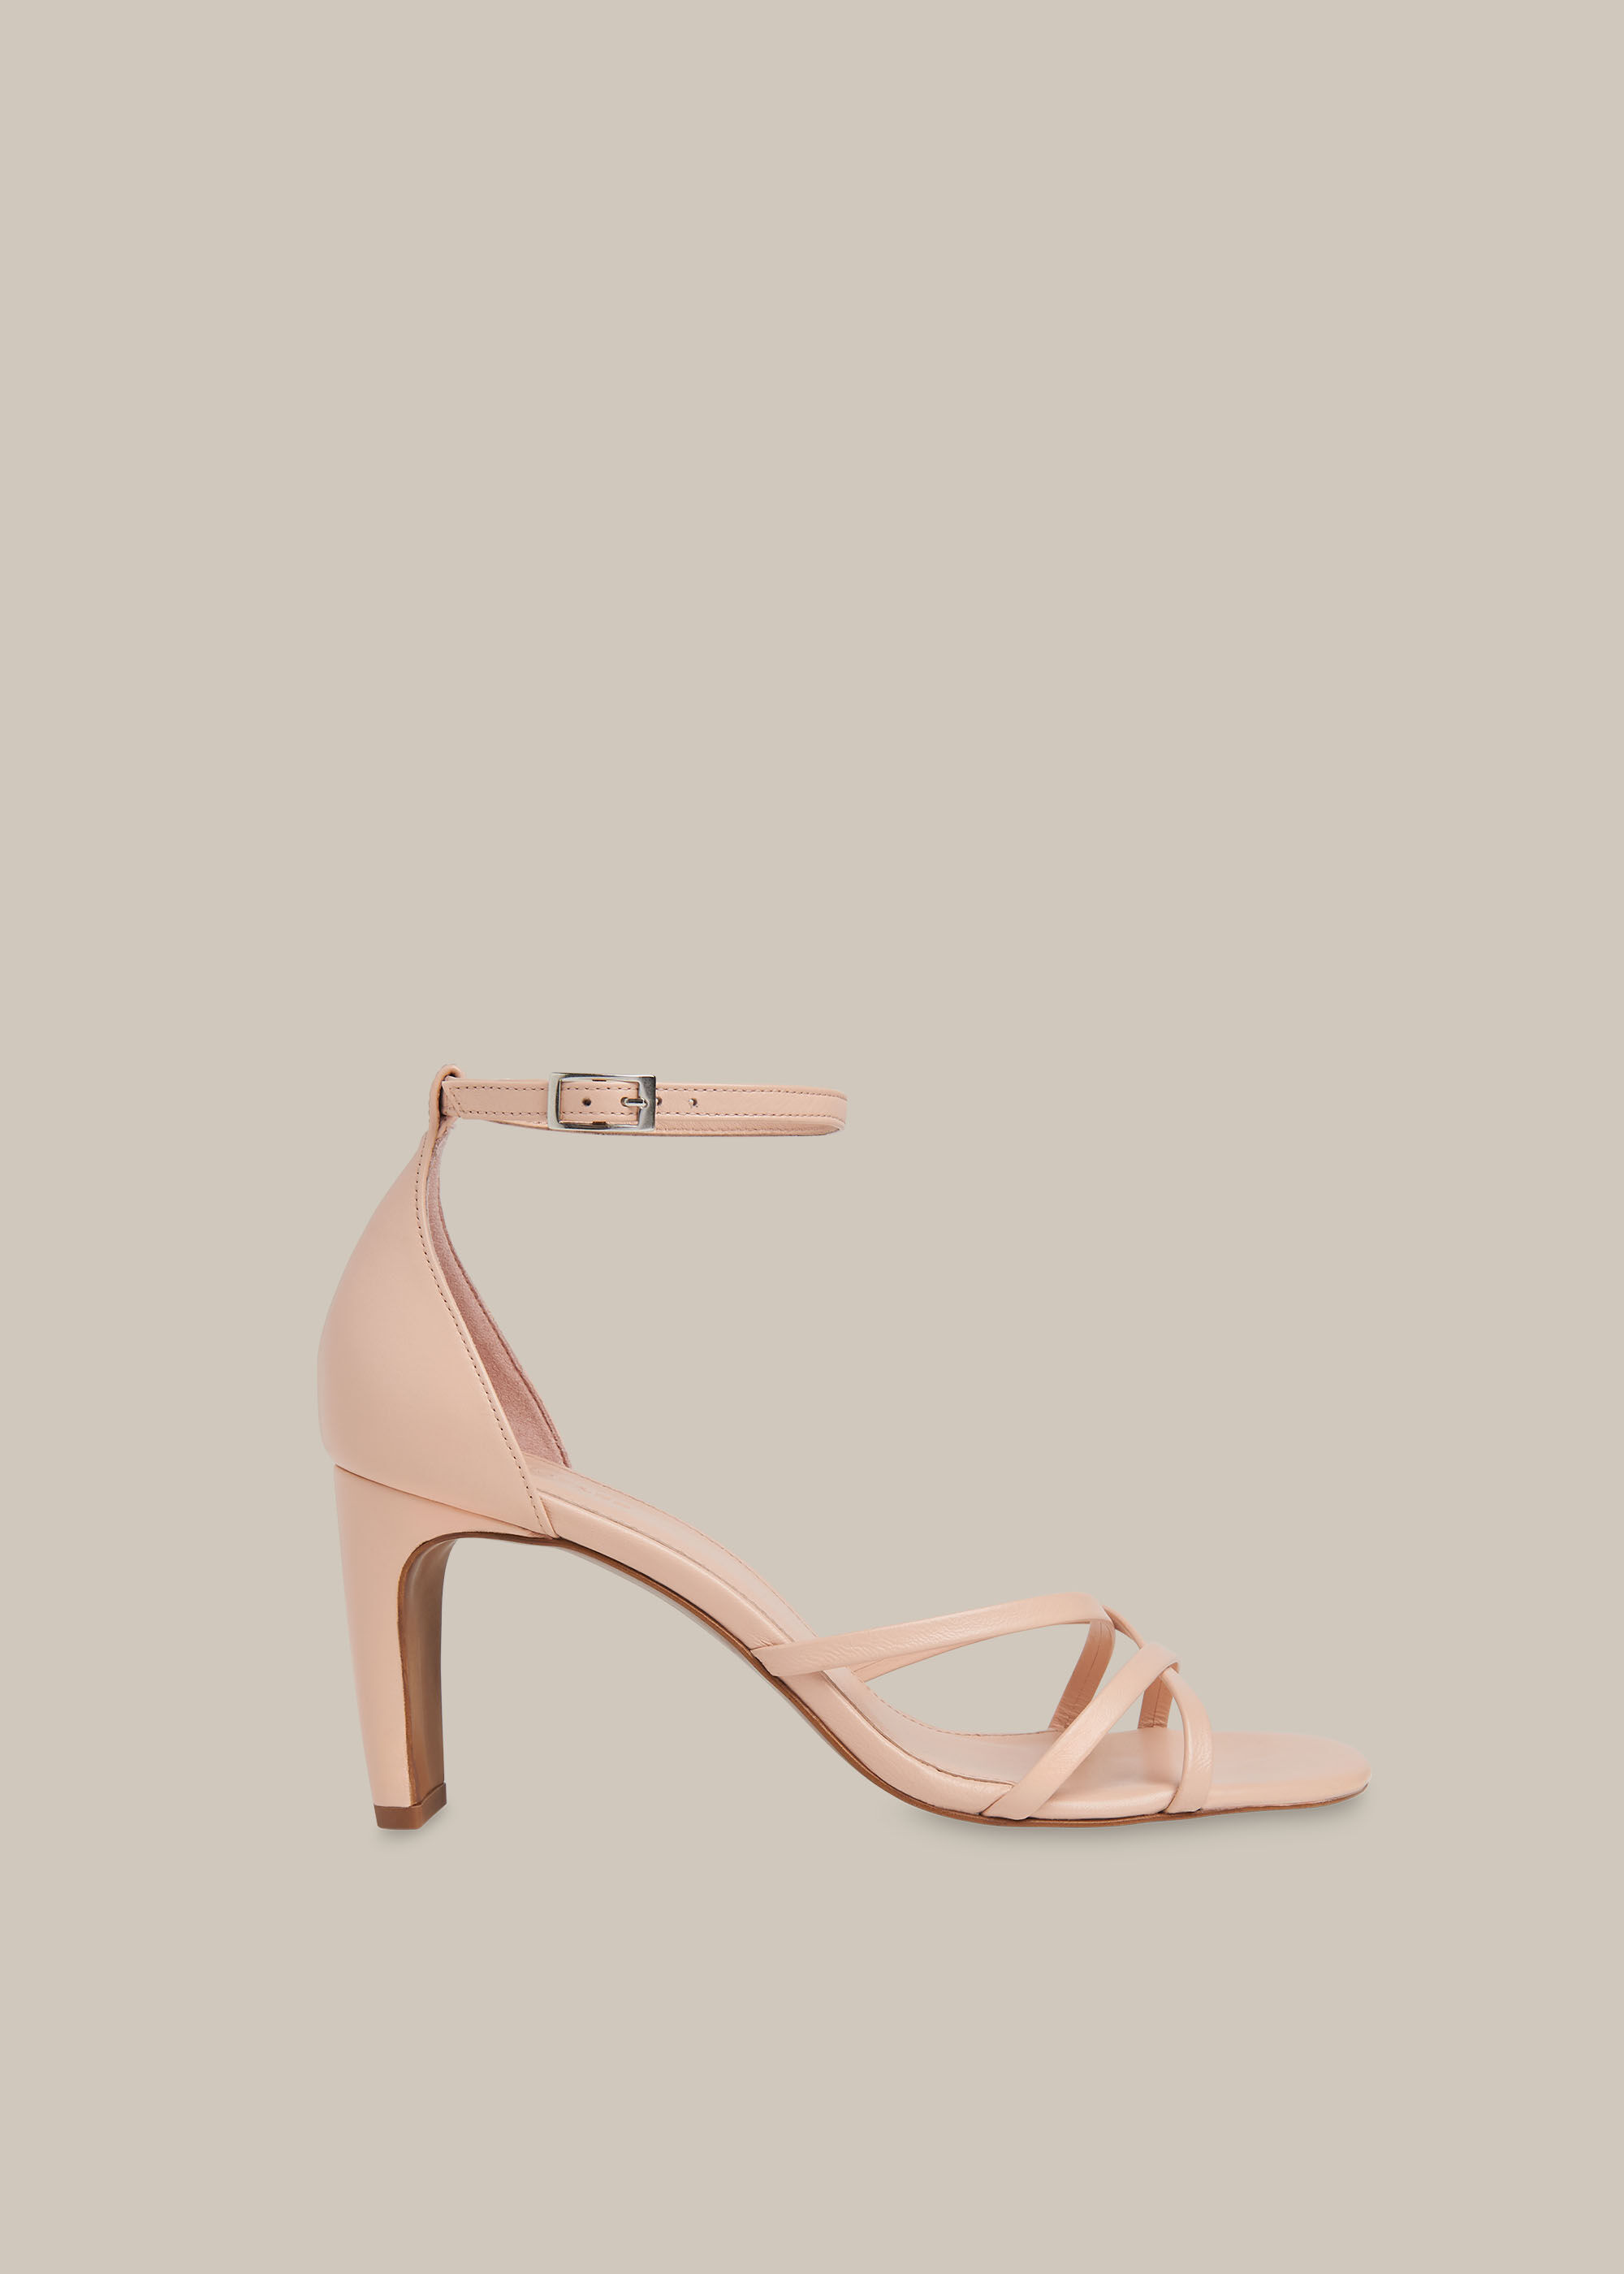 light pink strappy sandals